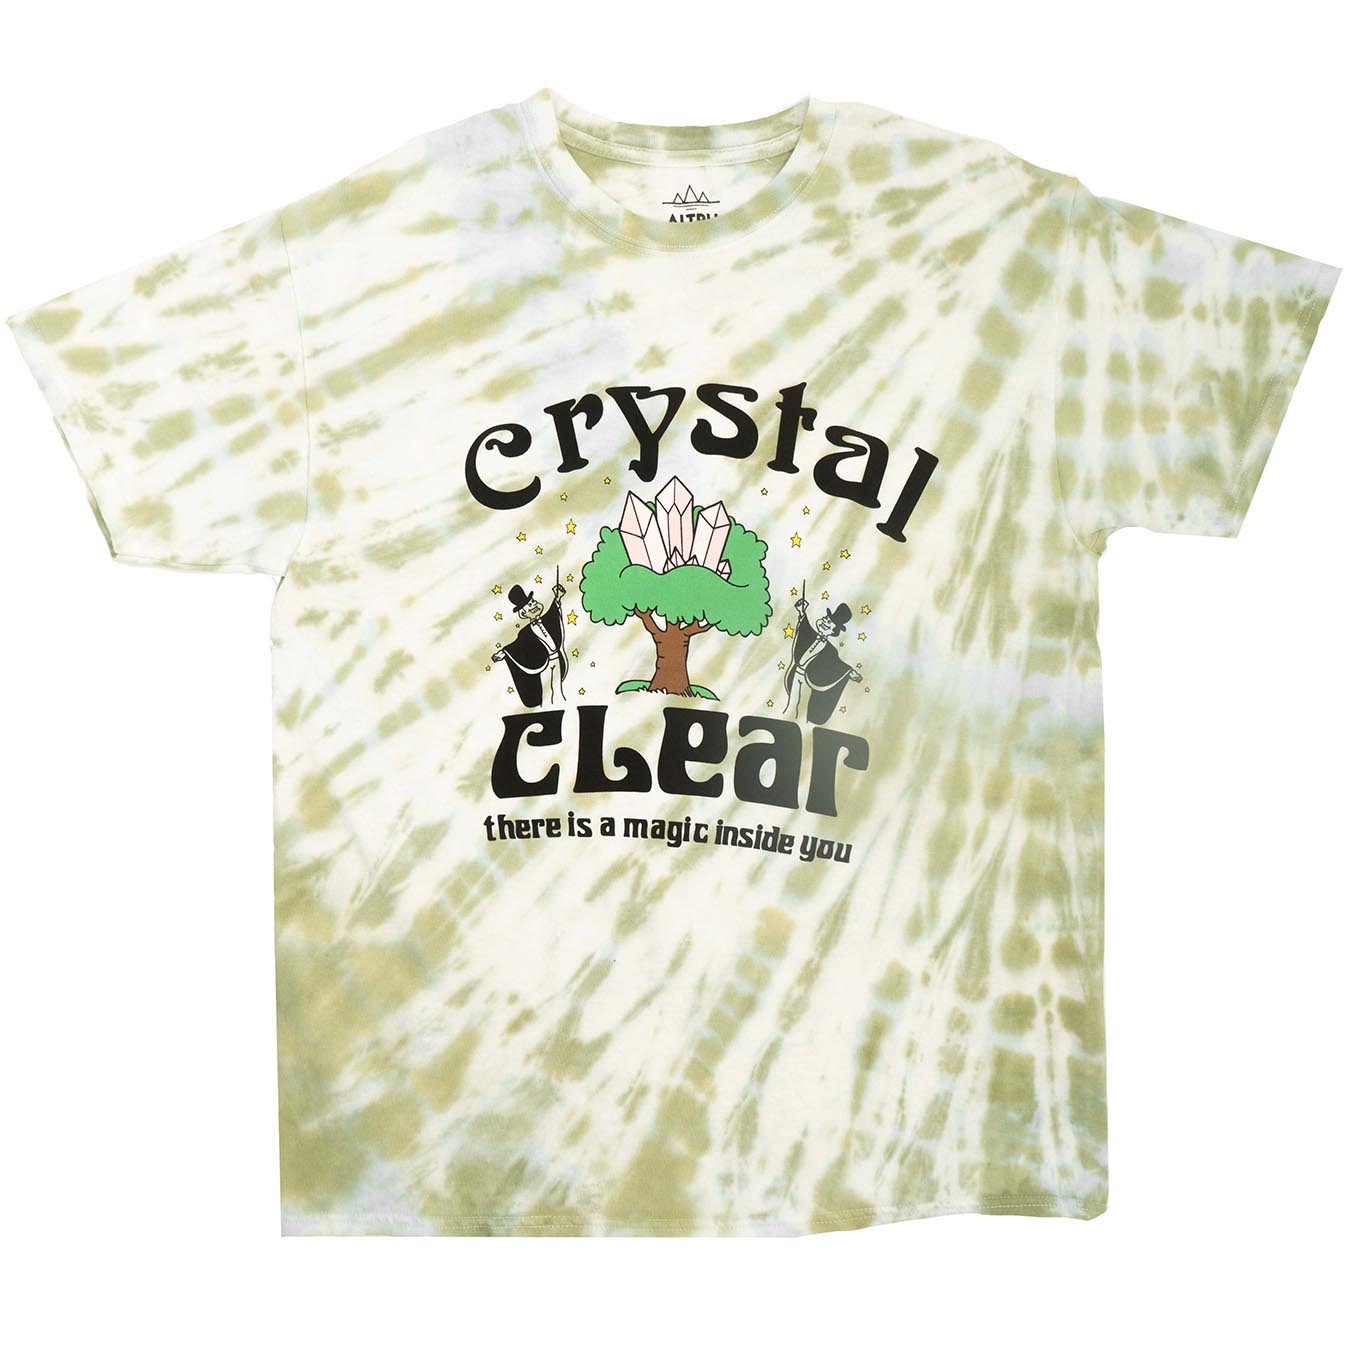 Green and white tie dye with graphic of crystals, tree, magician and motivational text screen printed on front of men's graphic tee. Full front photo.